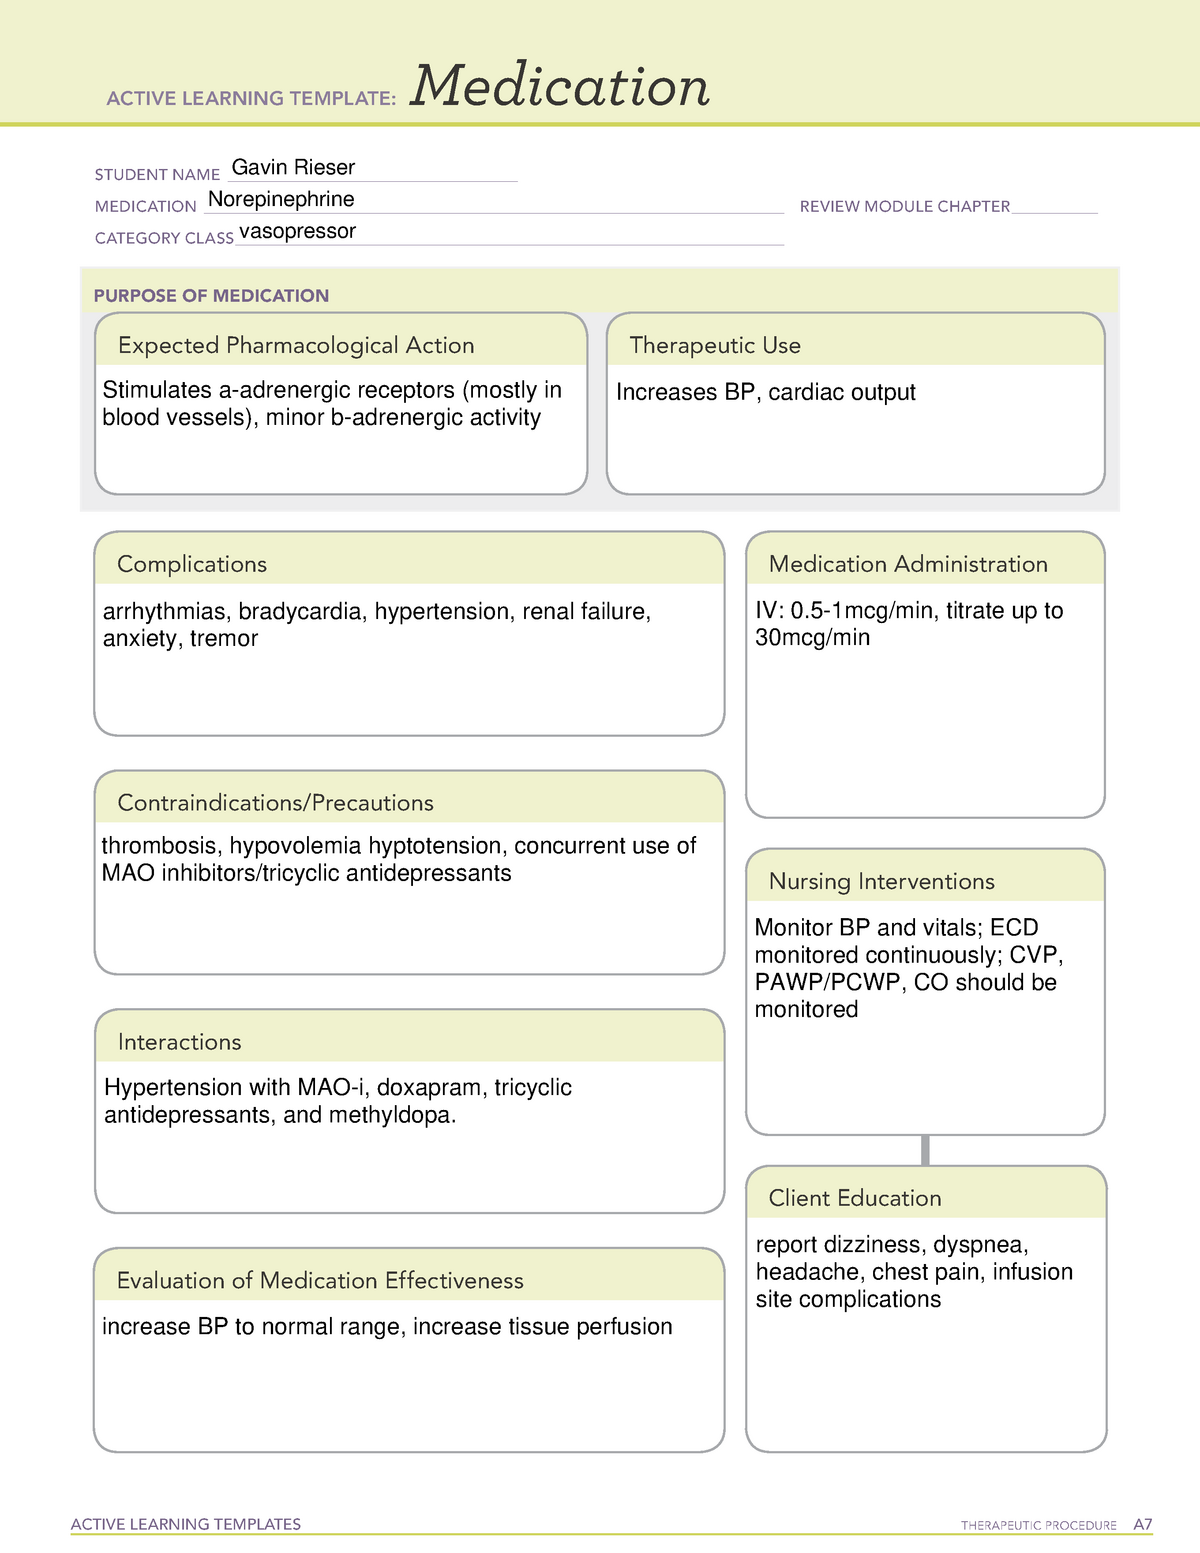 ATI medication norepinephrine ACTIVE LEARNING TEMPLATES THERAPEUTIC